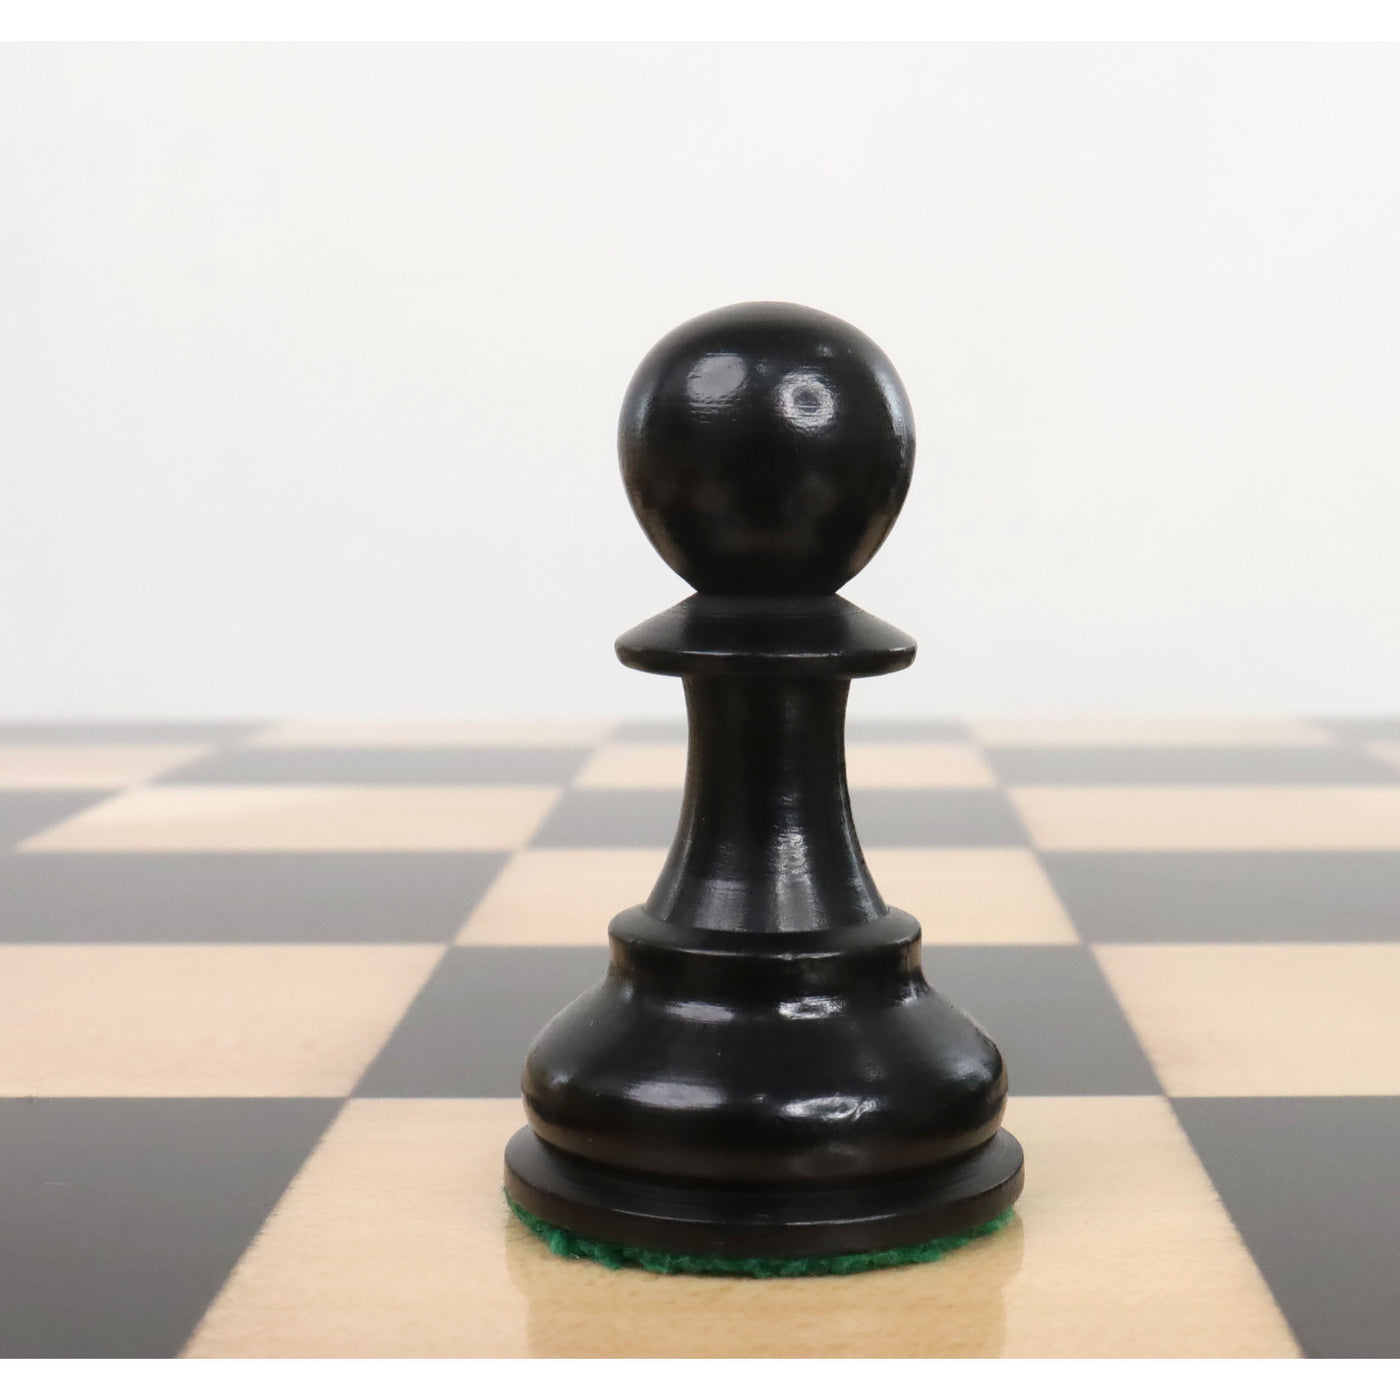 Slightly Imperfect 4.1" New Classic Staunton Wooden Chess Pieces Only Set-Weighted Ebonised Boxwood